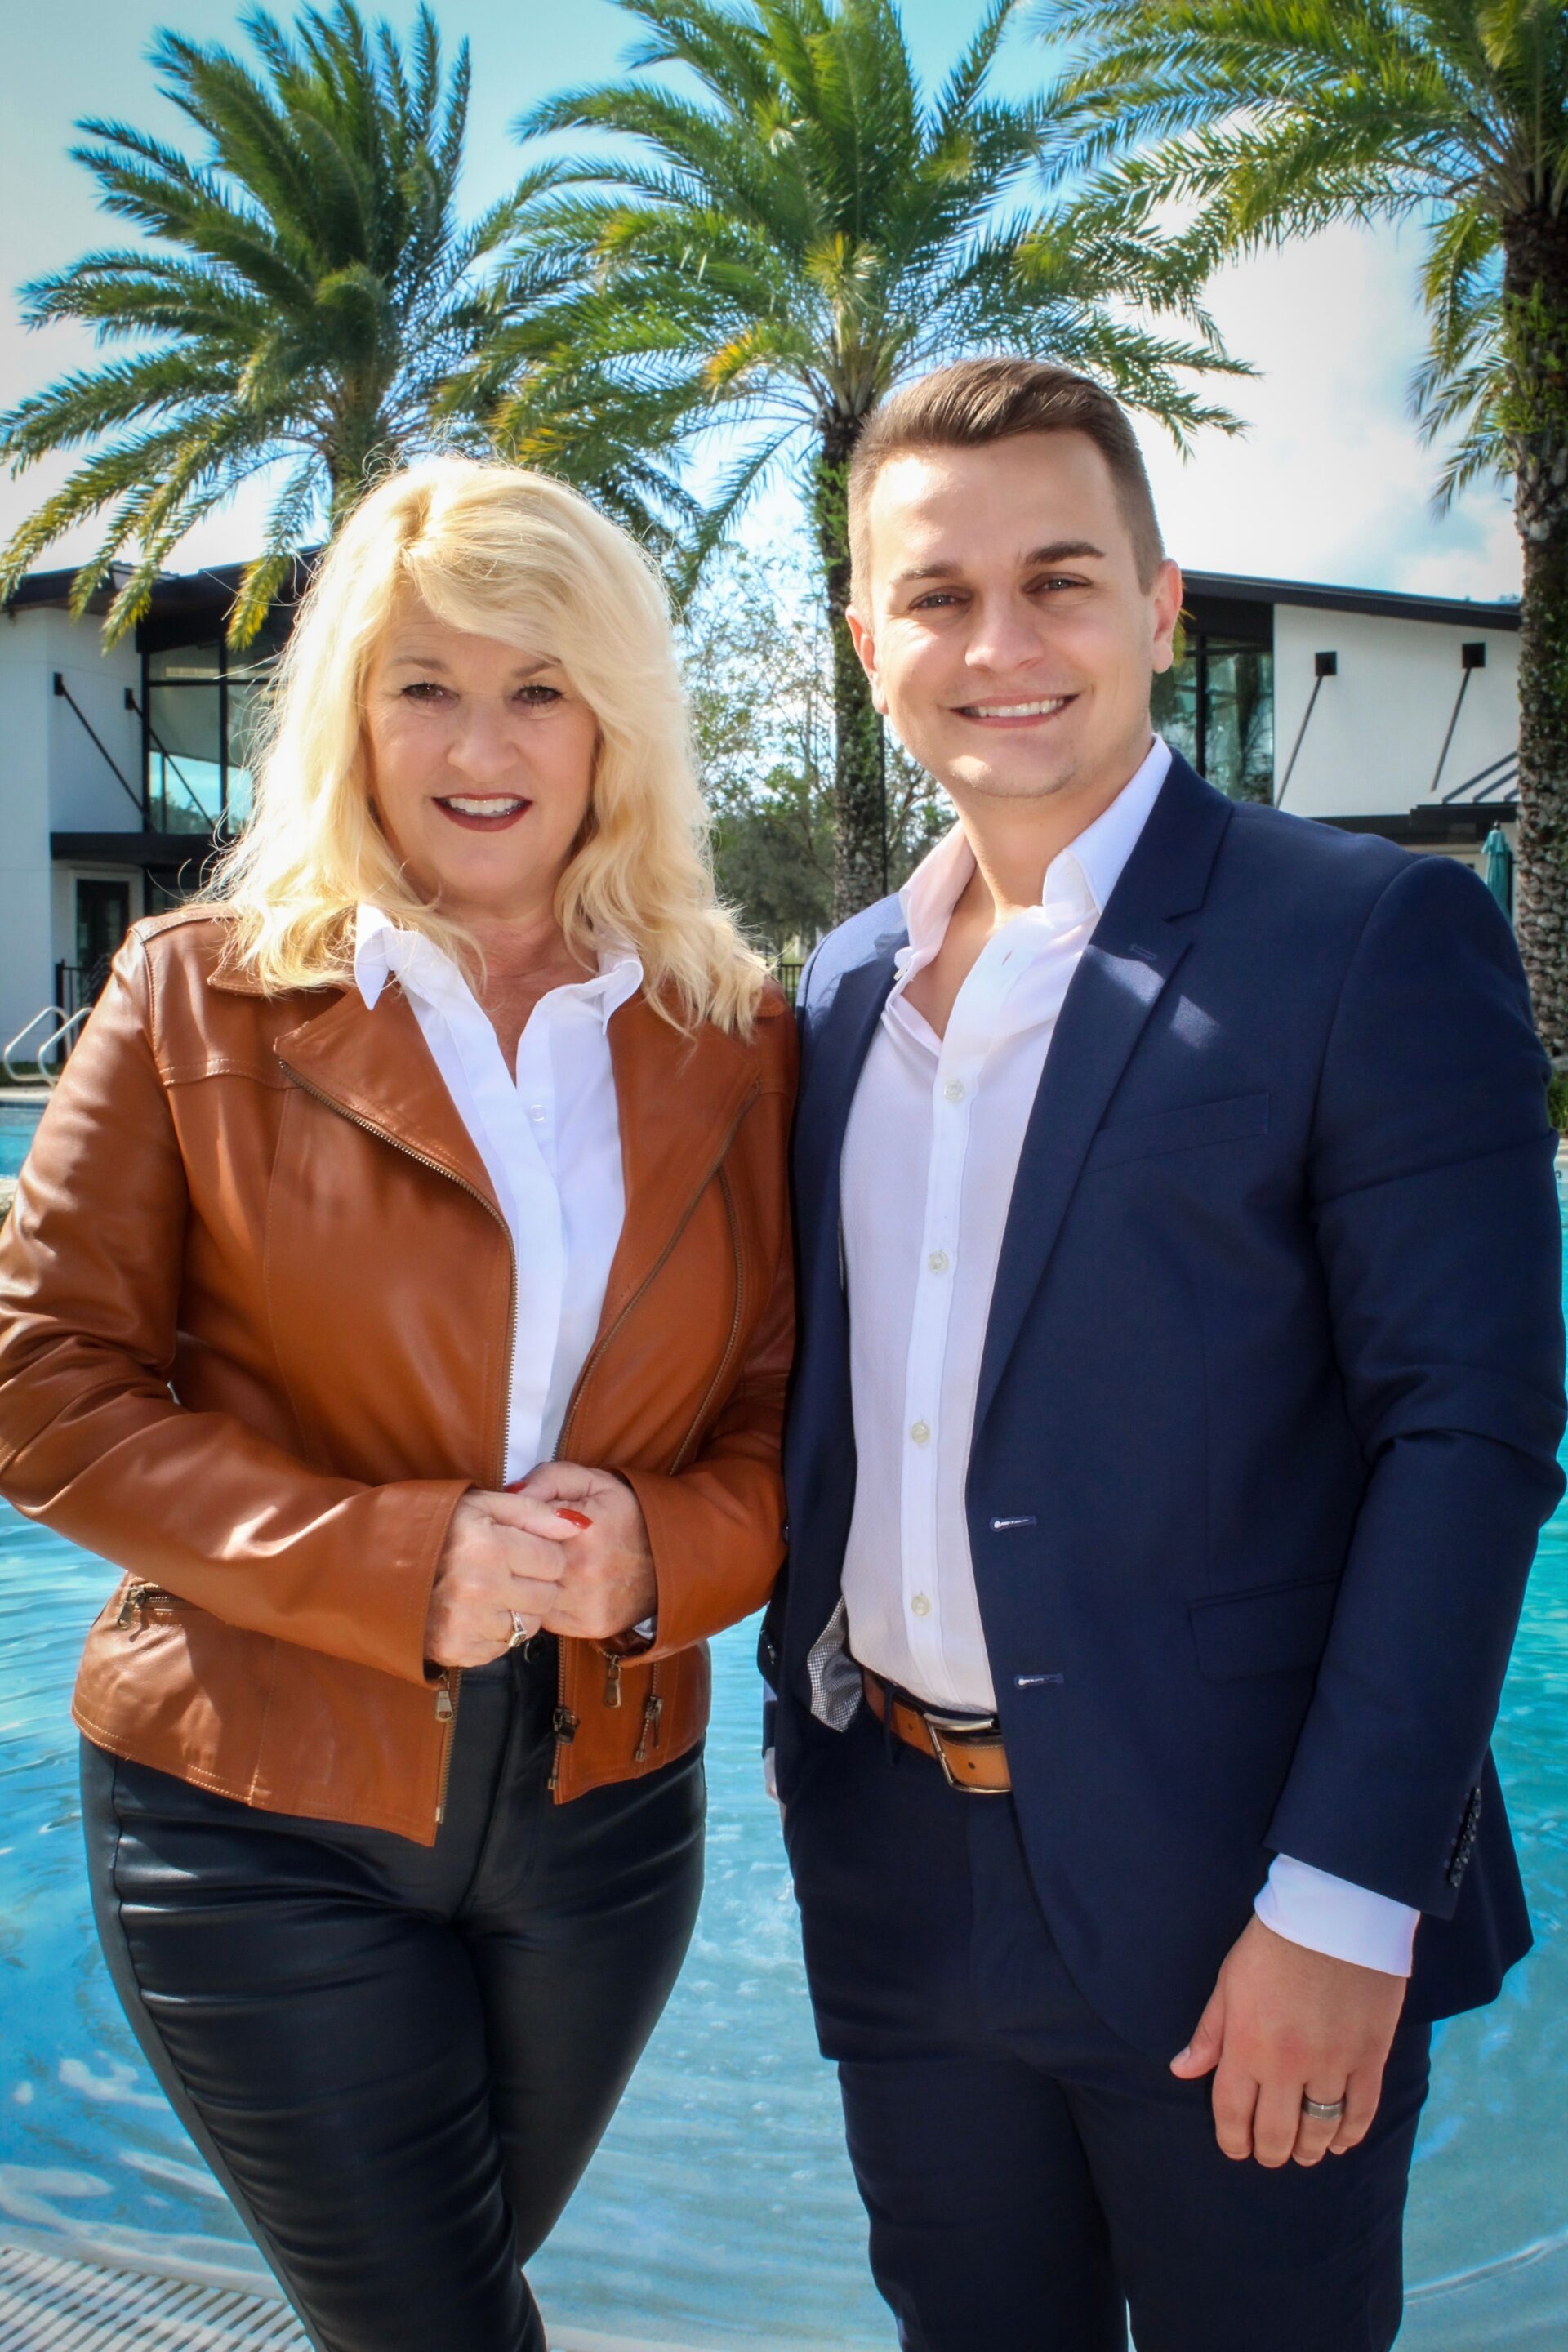 kim-cash-and-jordan-cash-mother-and-son-real-estate-team-in-carrollwood-florida